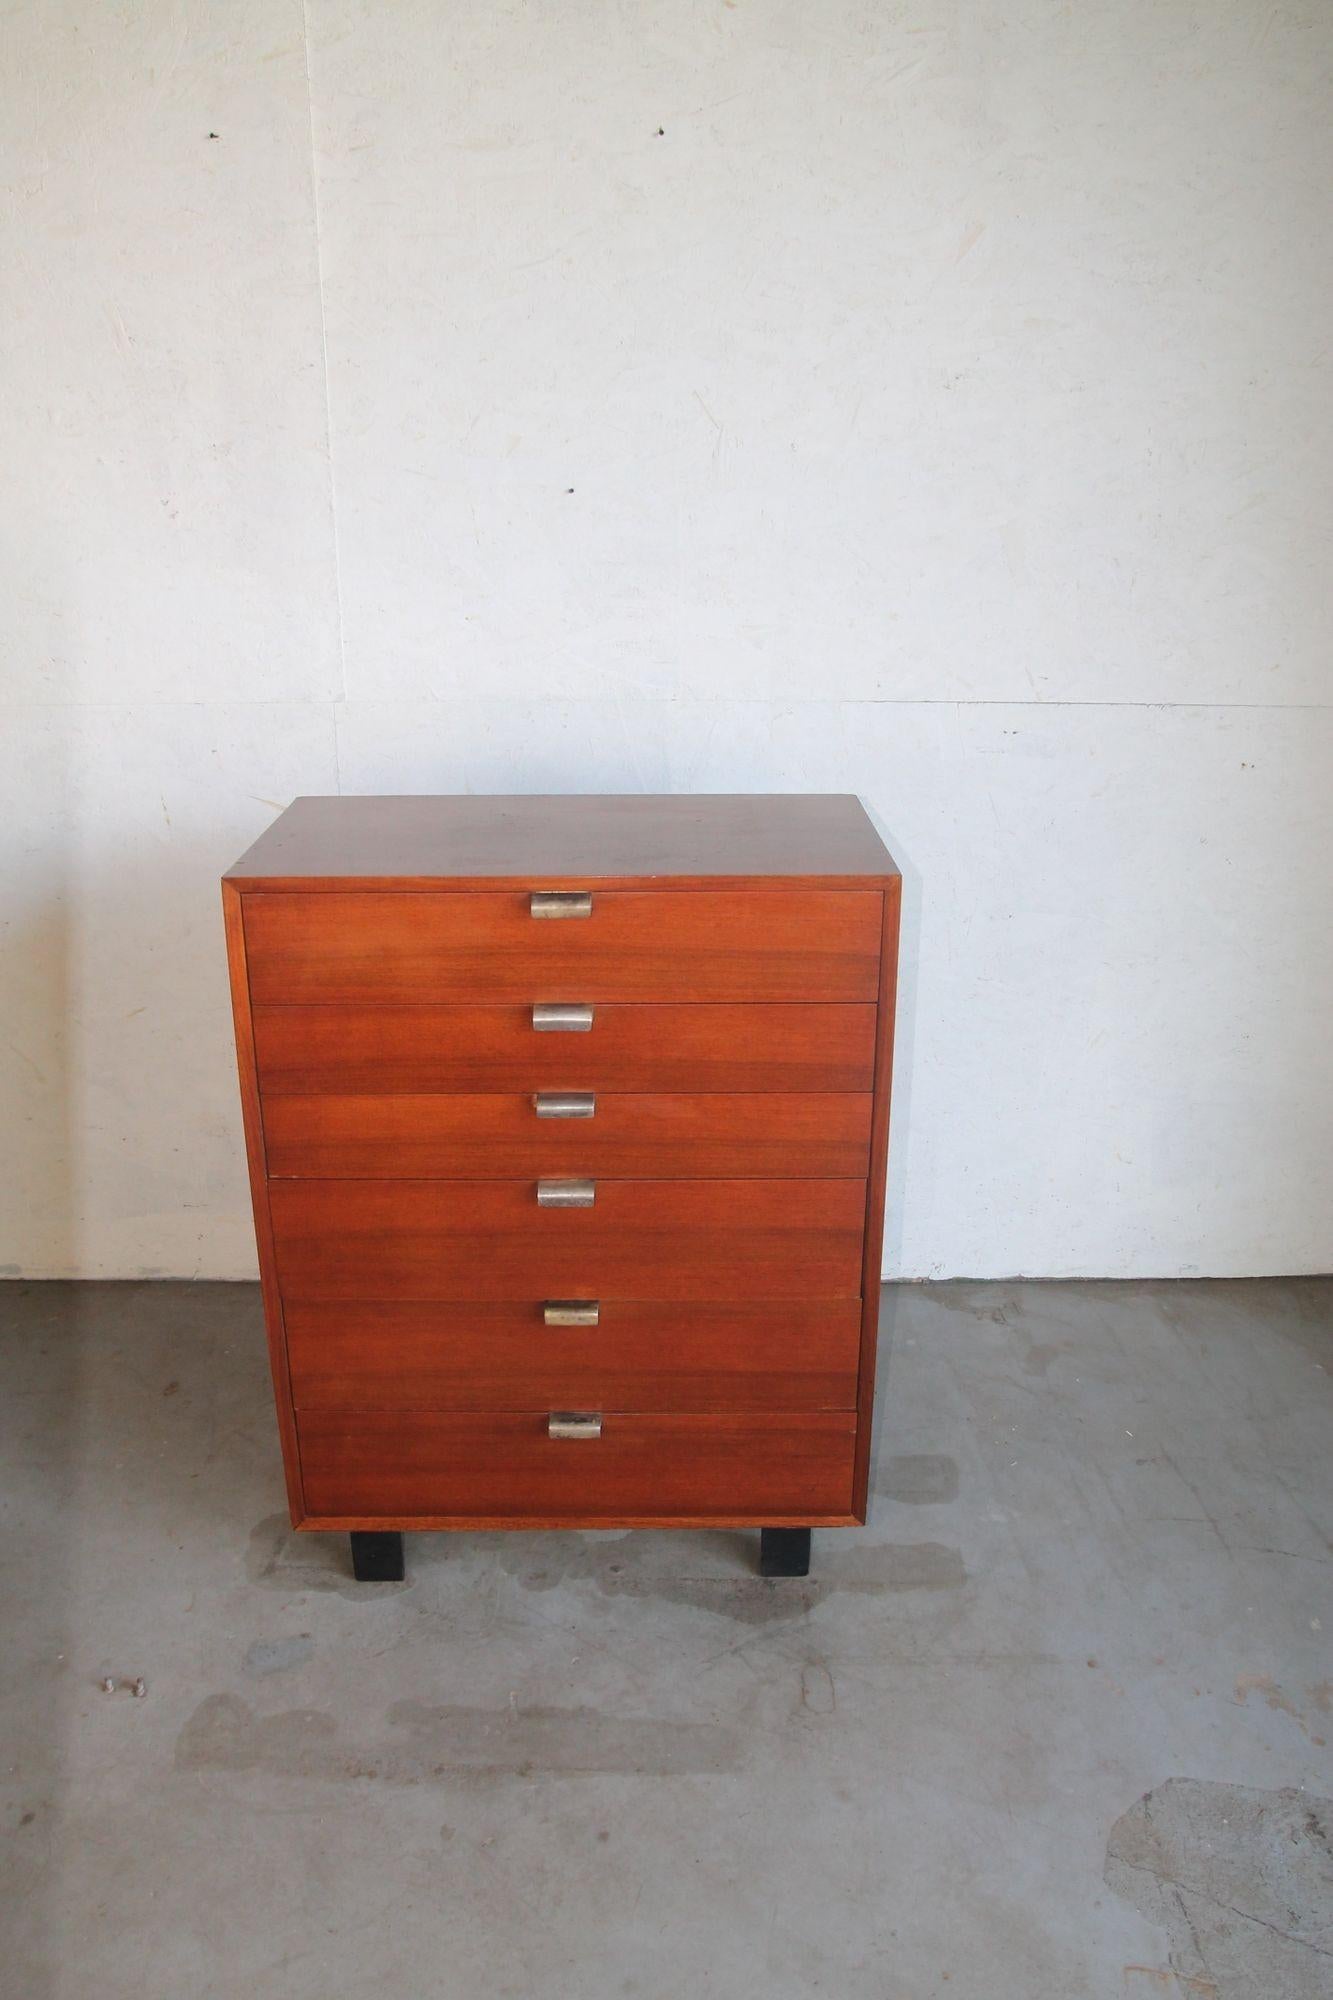 Great vintage George Nelson dresser for Herman Miller. Dresser is in nice vintage shape. Some scratches and nicks on several areas but does not distract from this classic design by Nelson.